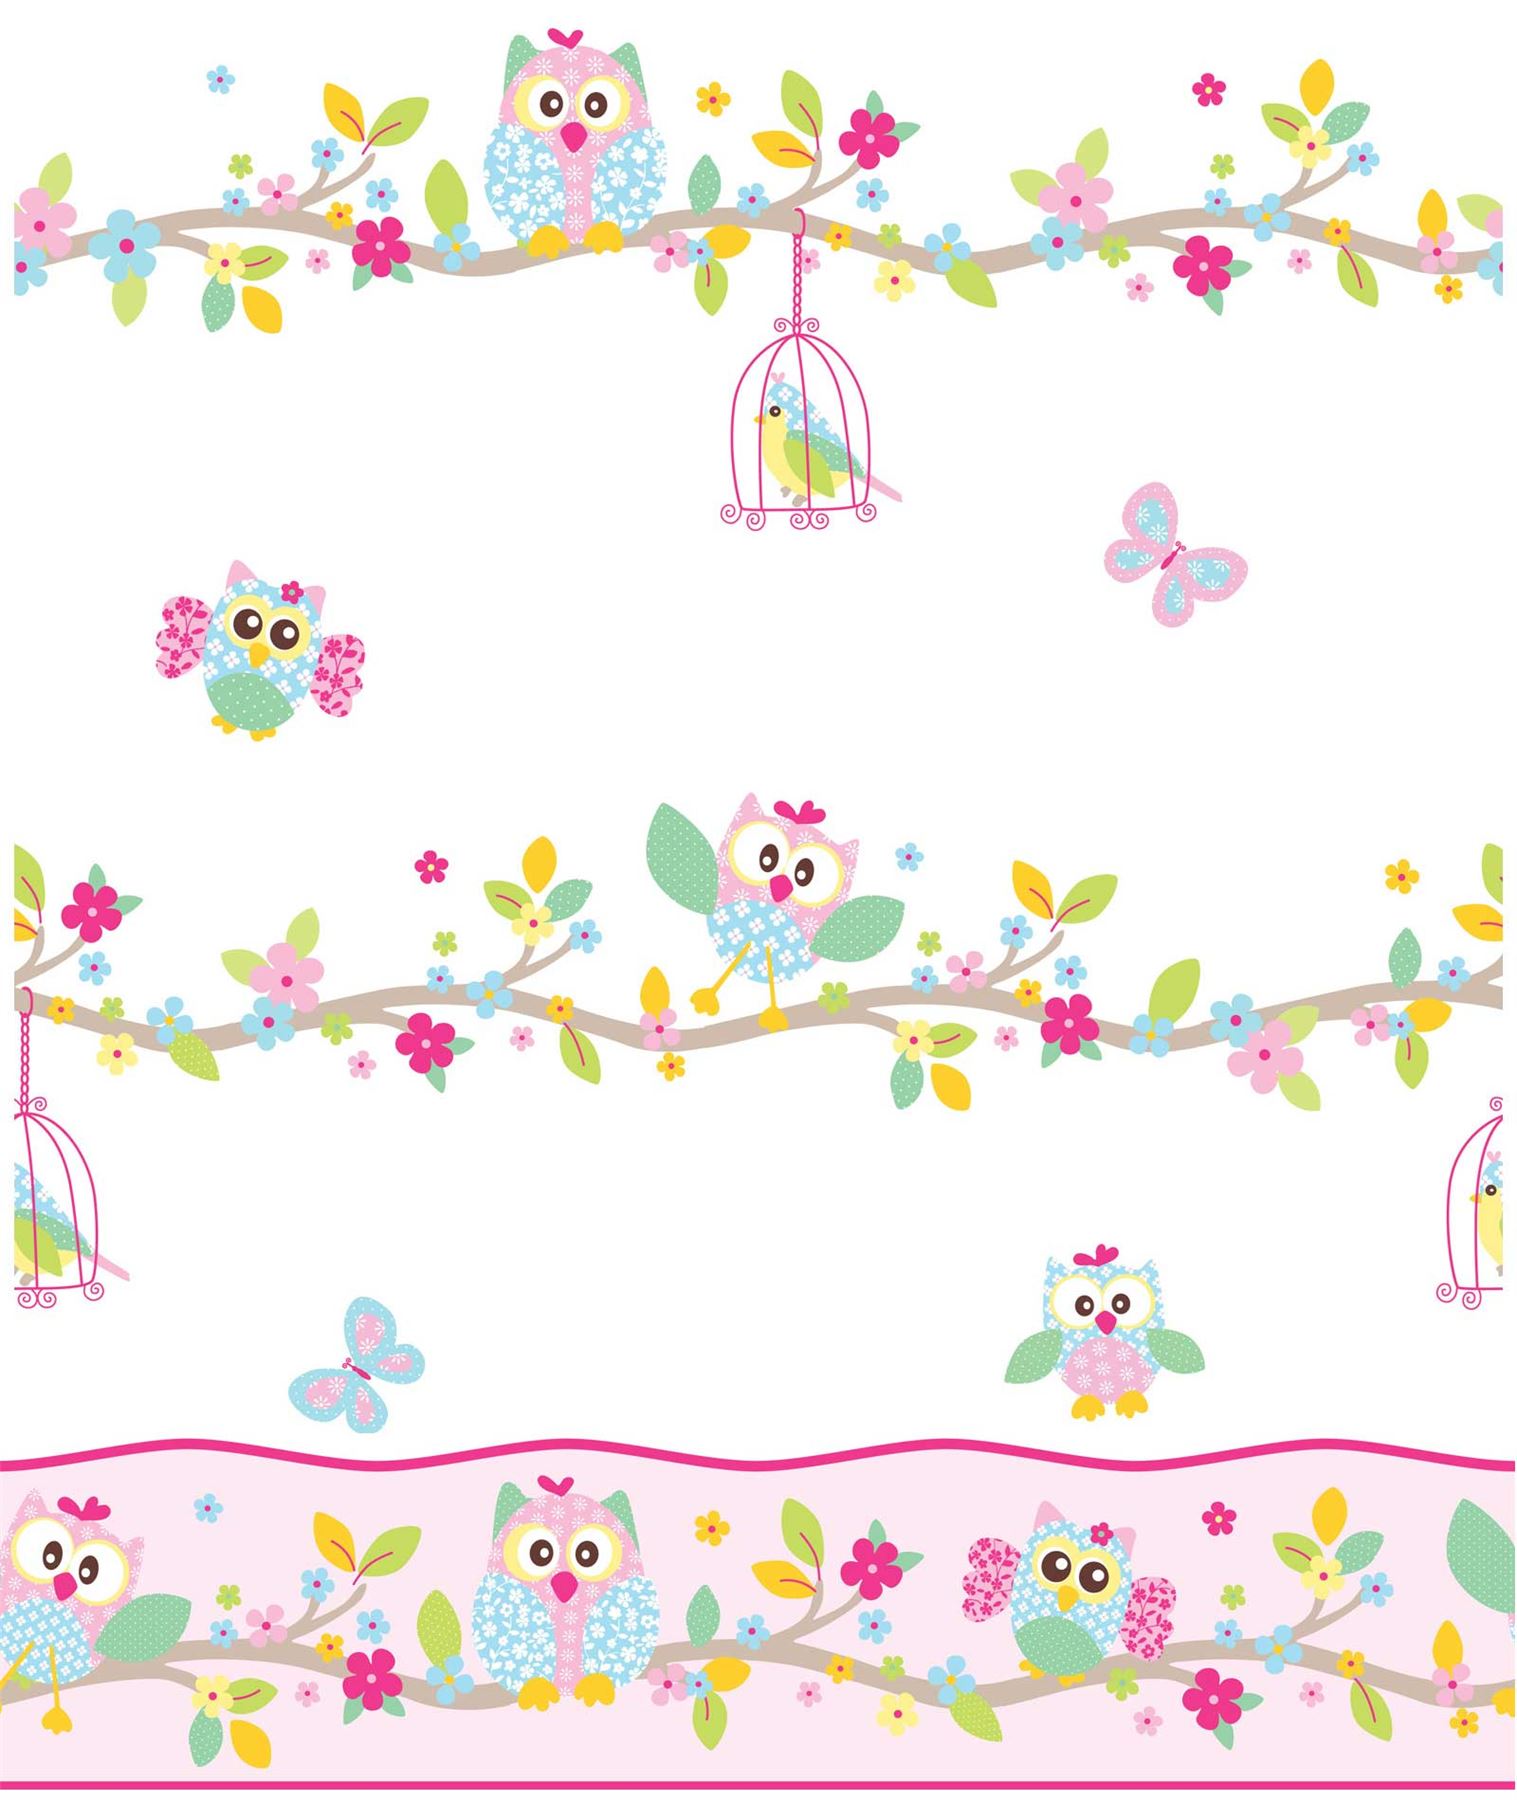 Patchwork Owl Wallpaper And Border White Pink Pastel Bedroom Nursery